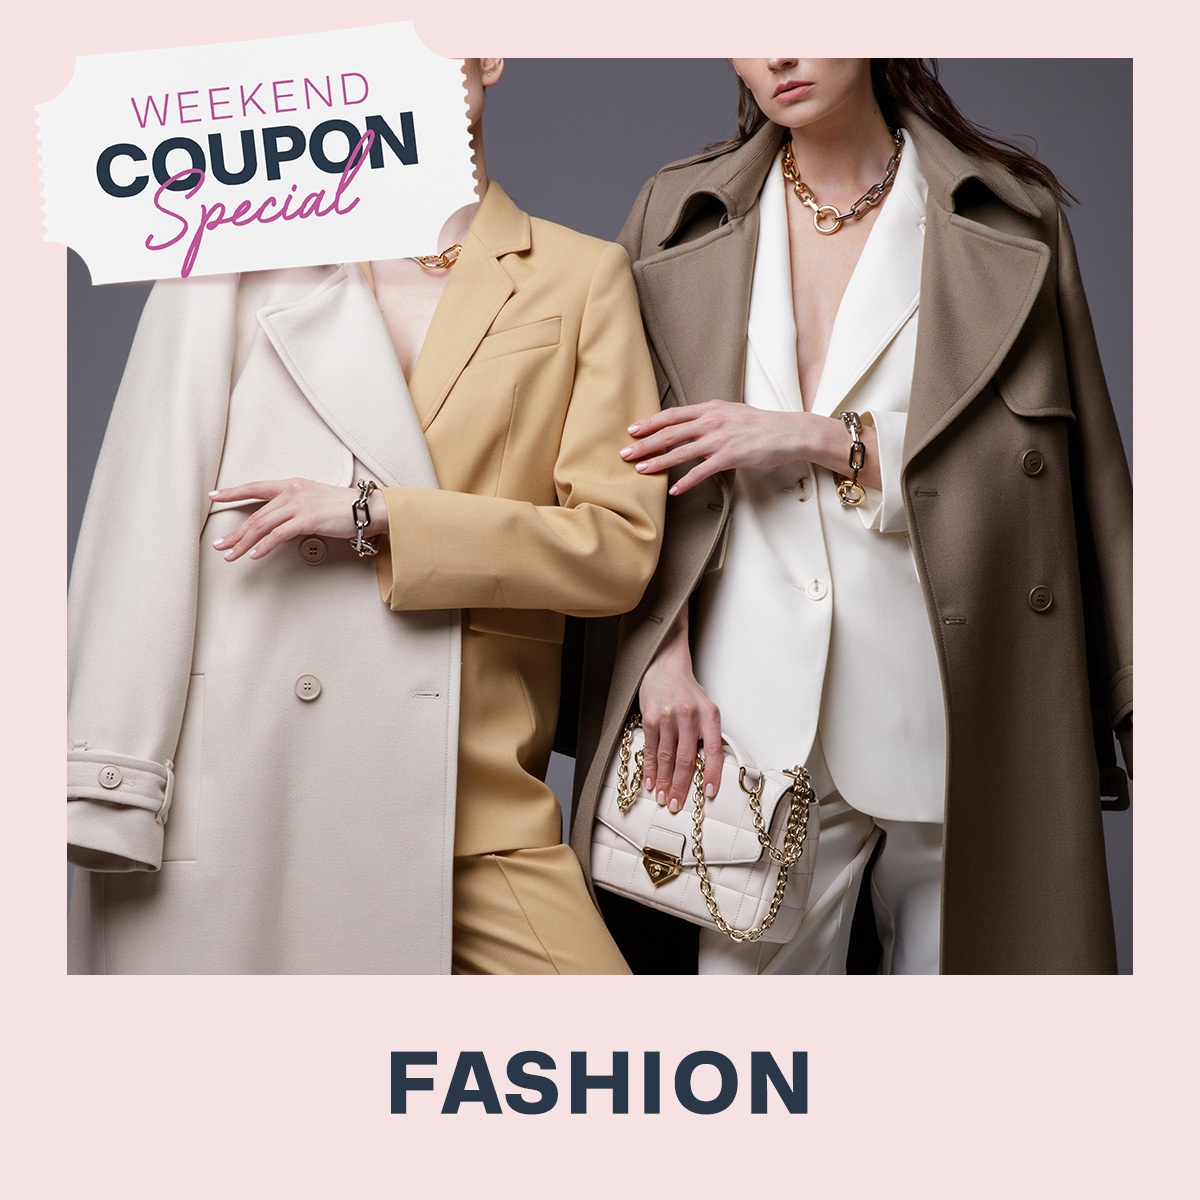 Weekend Fashion Coupon Special